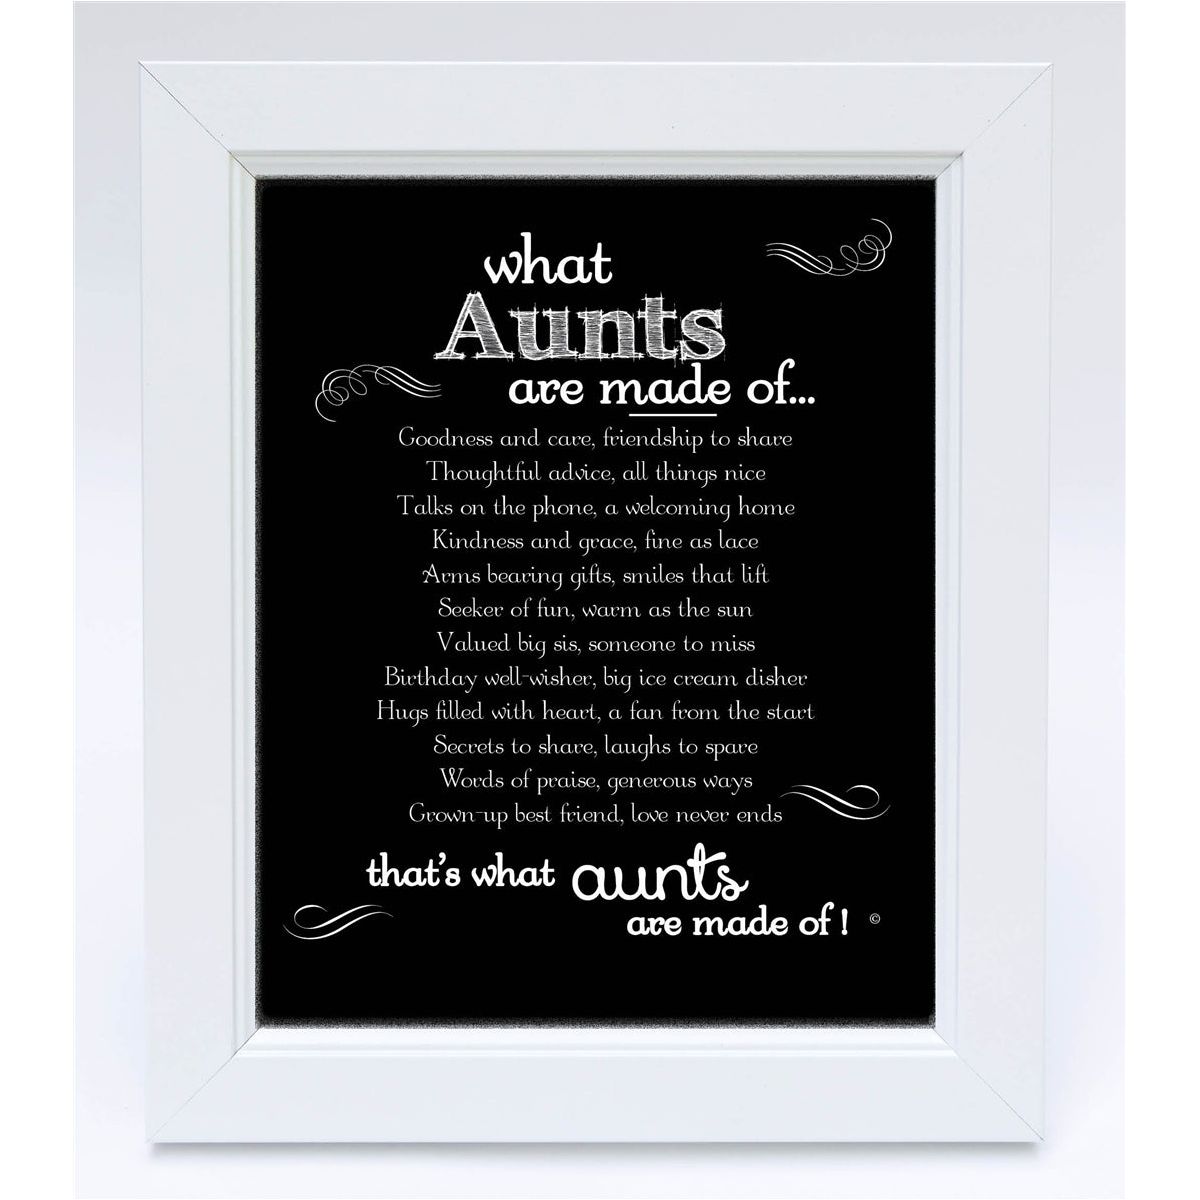 White 8"x10" frame with "What Aunts are Made of..." poem